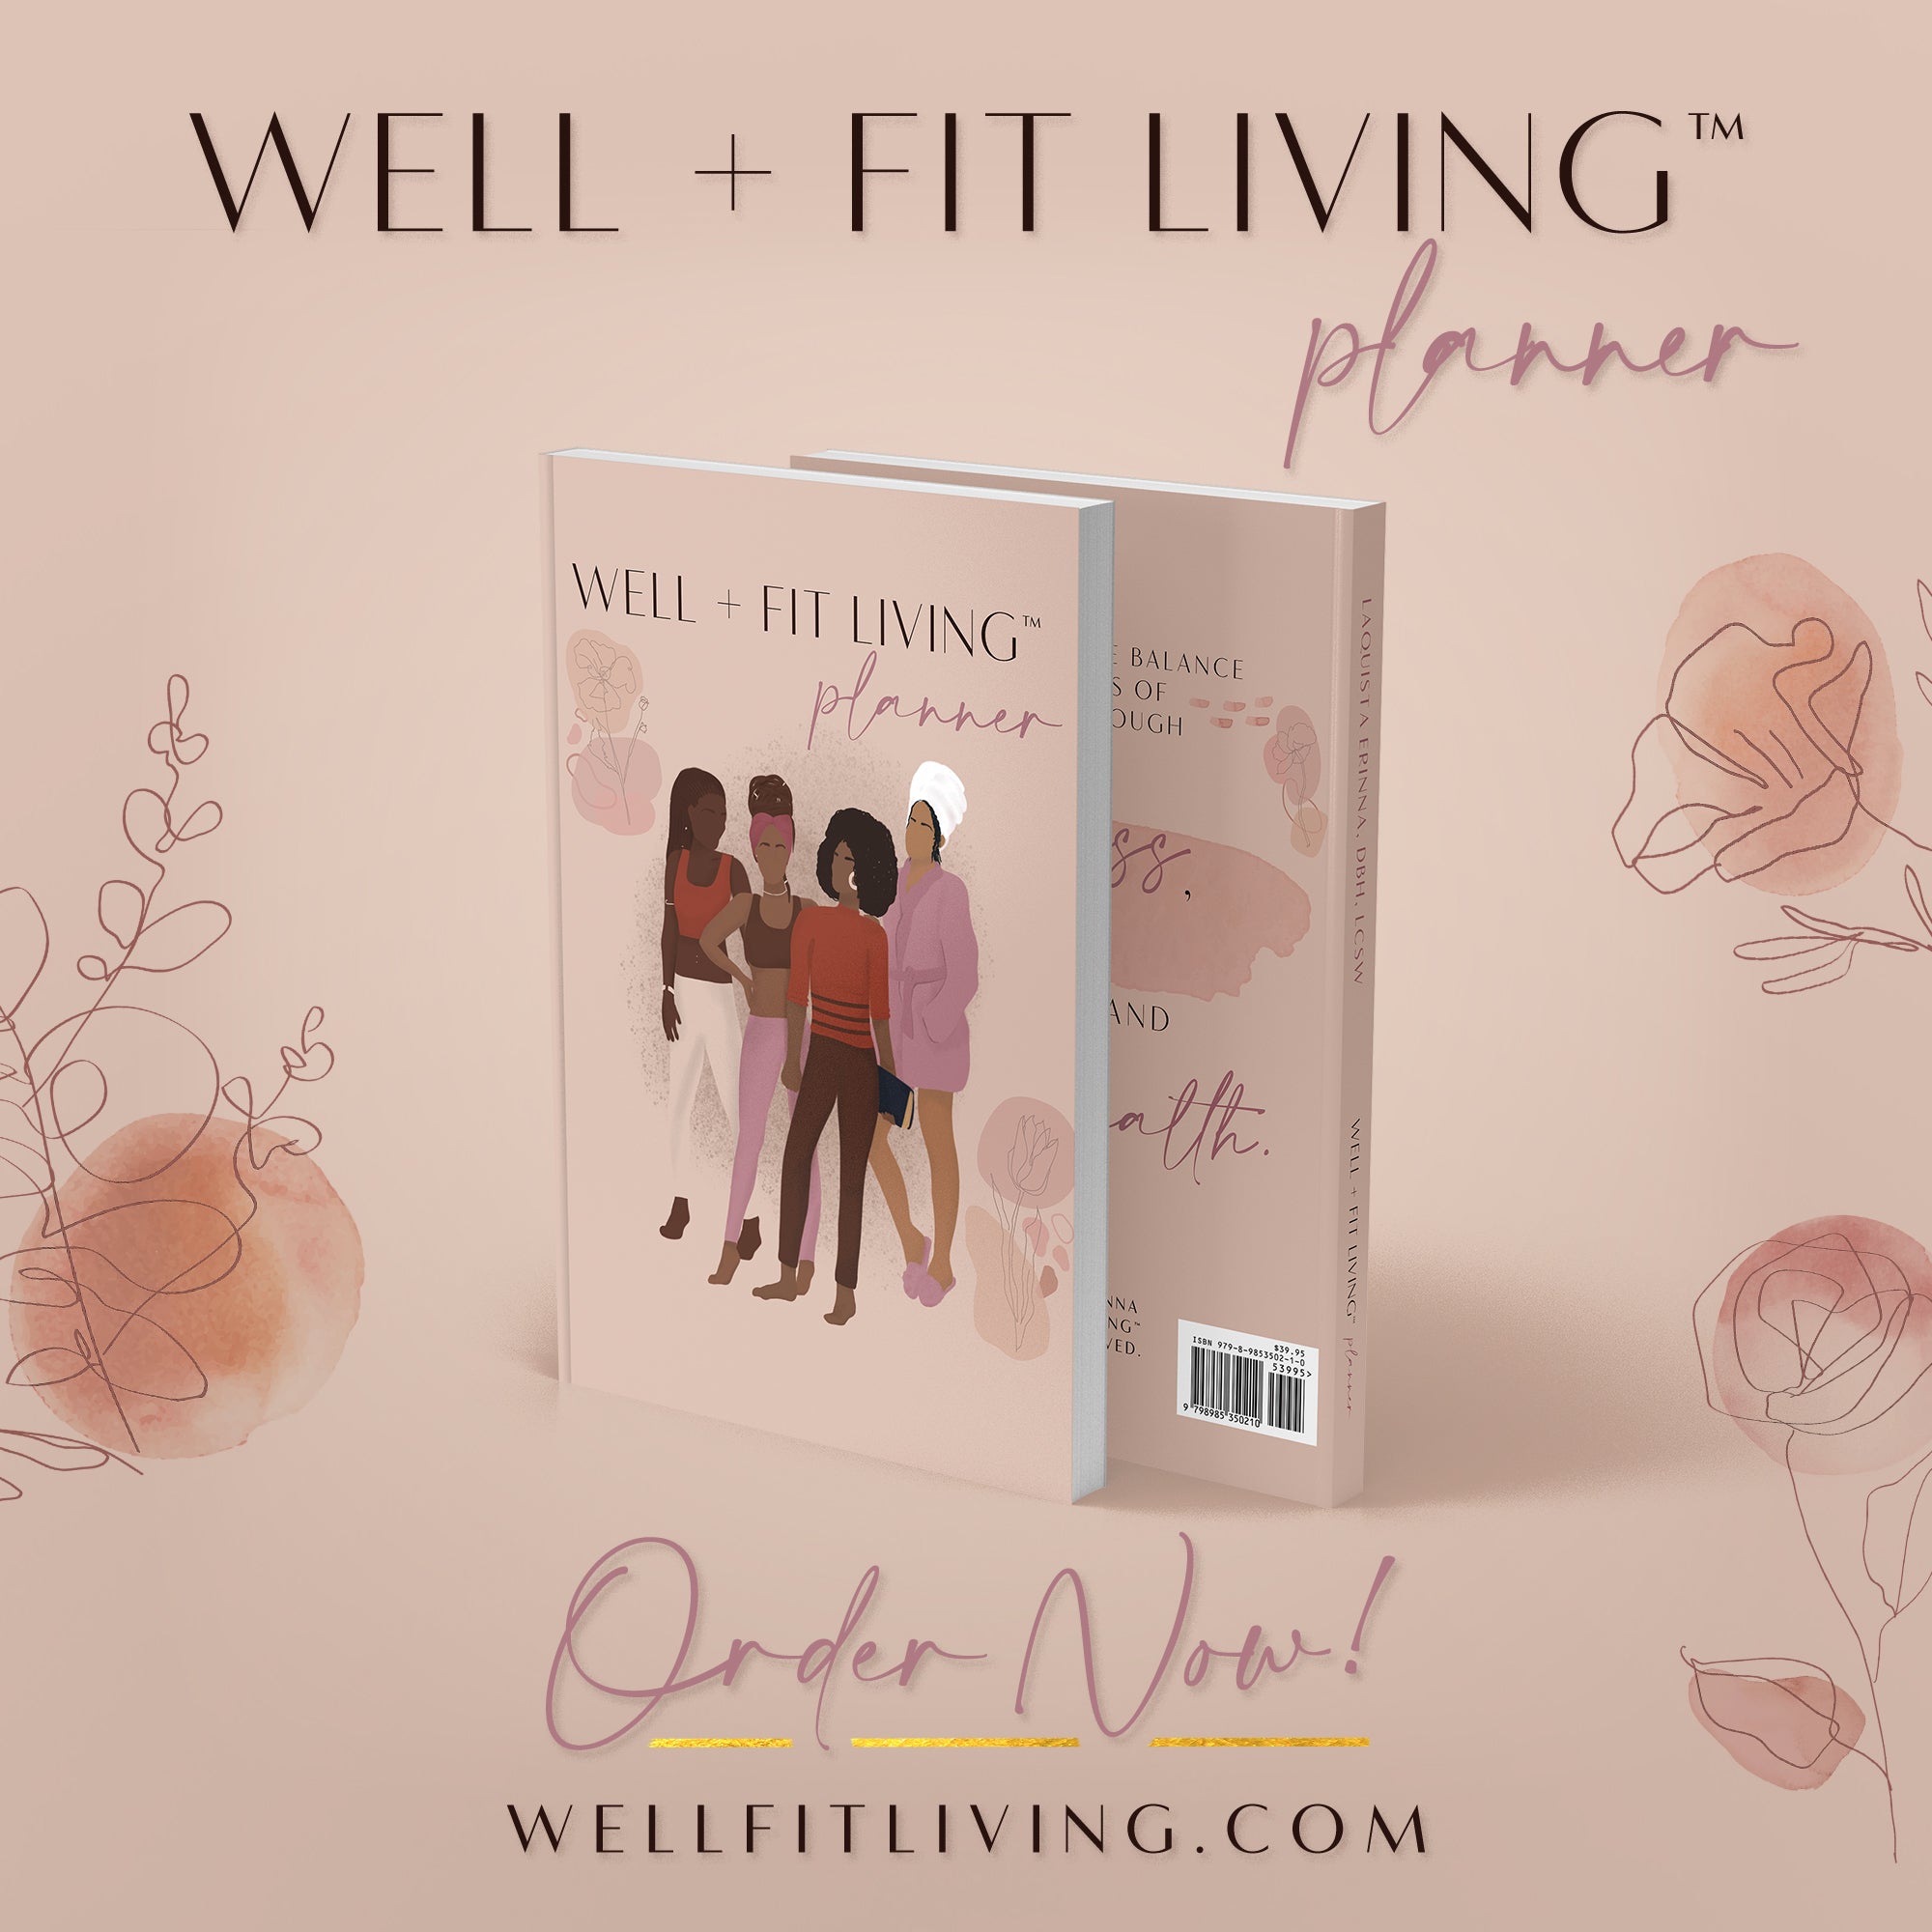 WELL FIT LIVING Planner